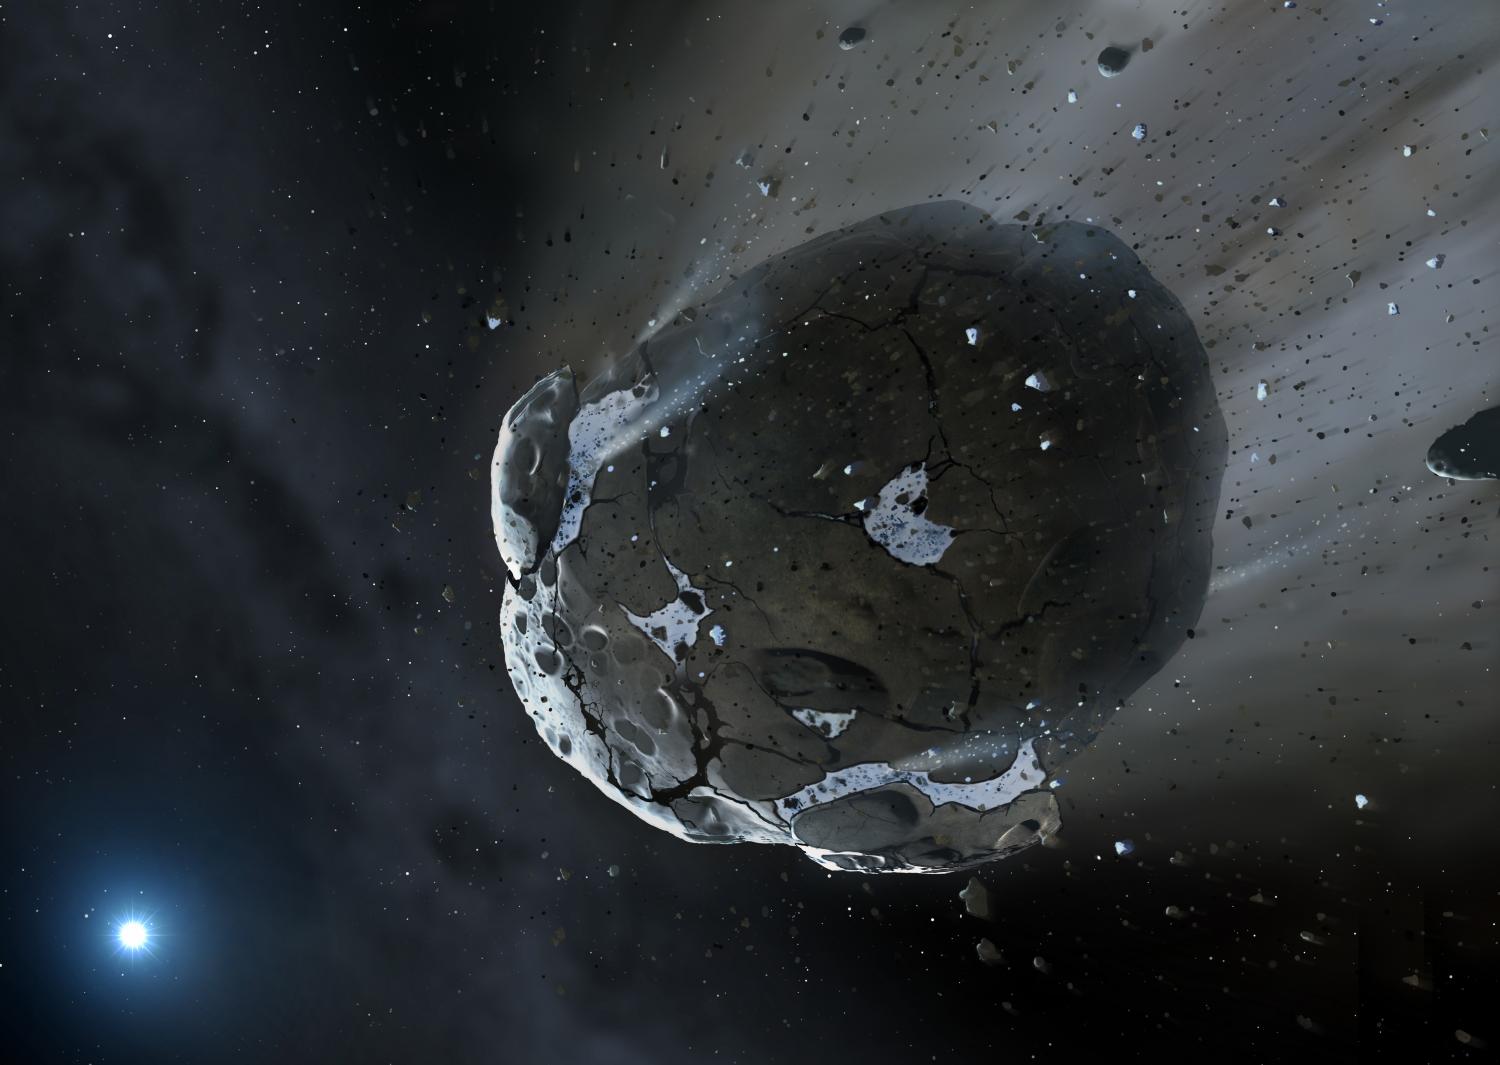 Evidence for how water reached Earth found in asteroid debris